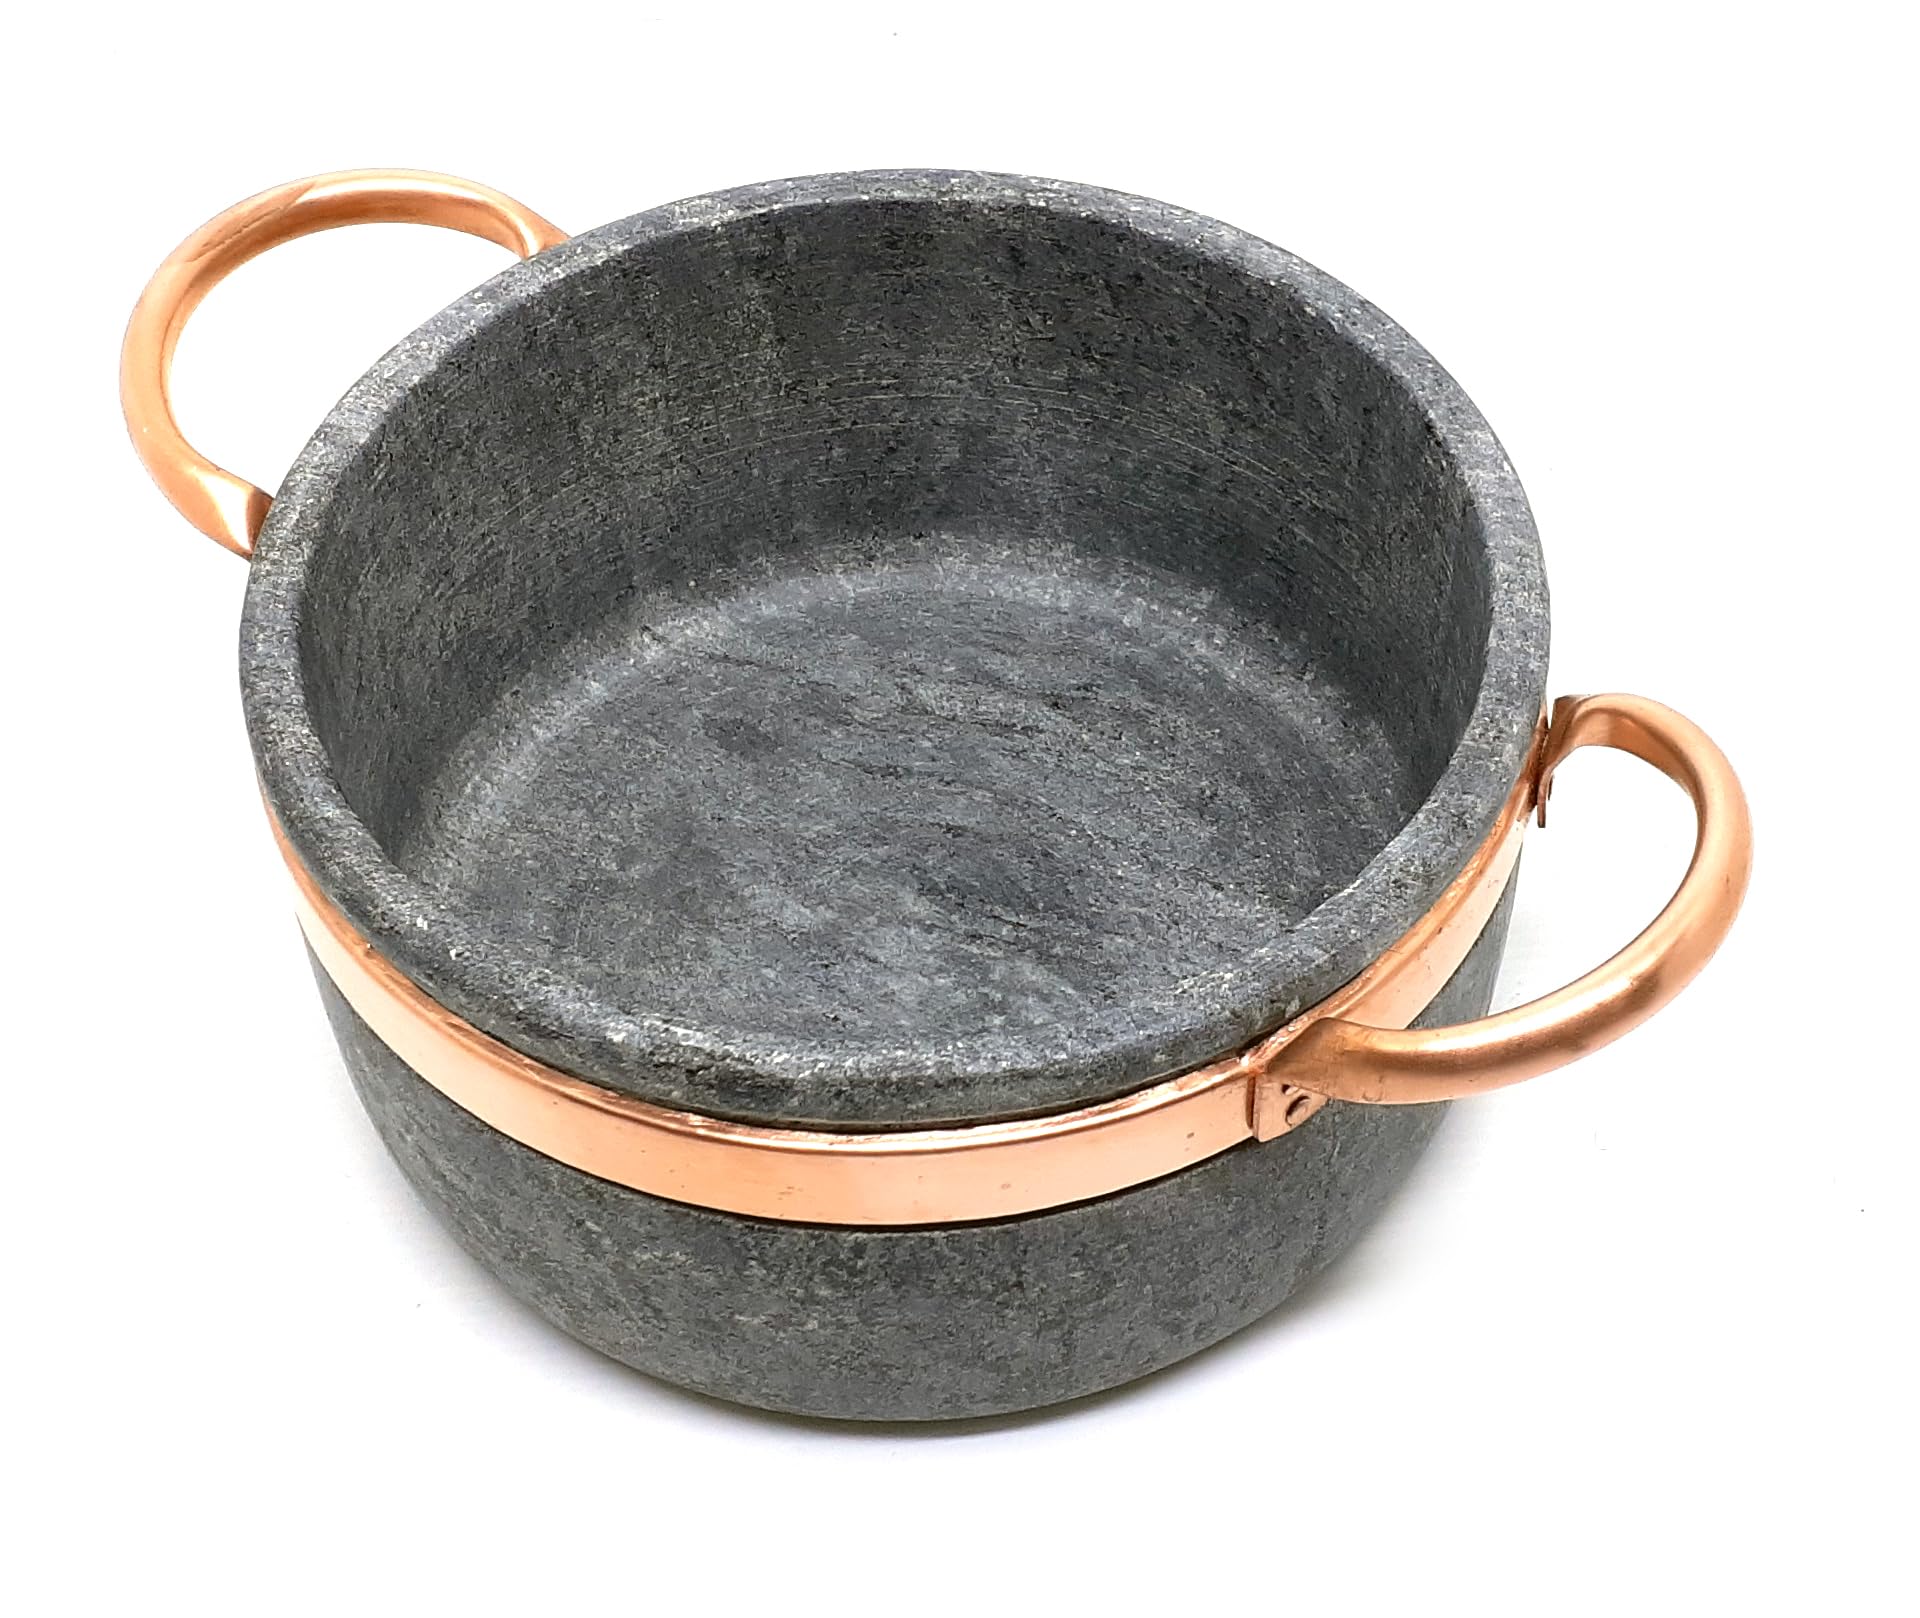 Cookstone 2.4 quarts Dutch oven with copper handles | Handcrafted from a block of pure soapstone | Unique, durable and eco-friendly | Non-toxic and Non-stick | THE GREEN ALTERNATIVE TO CAST IRON